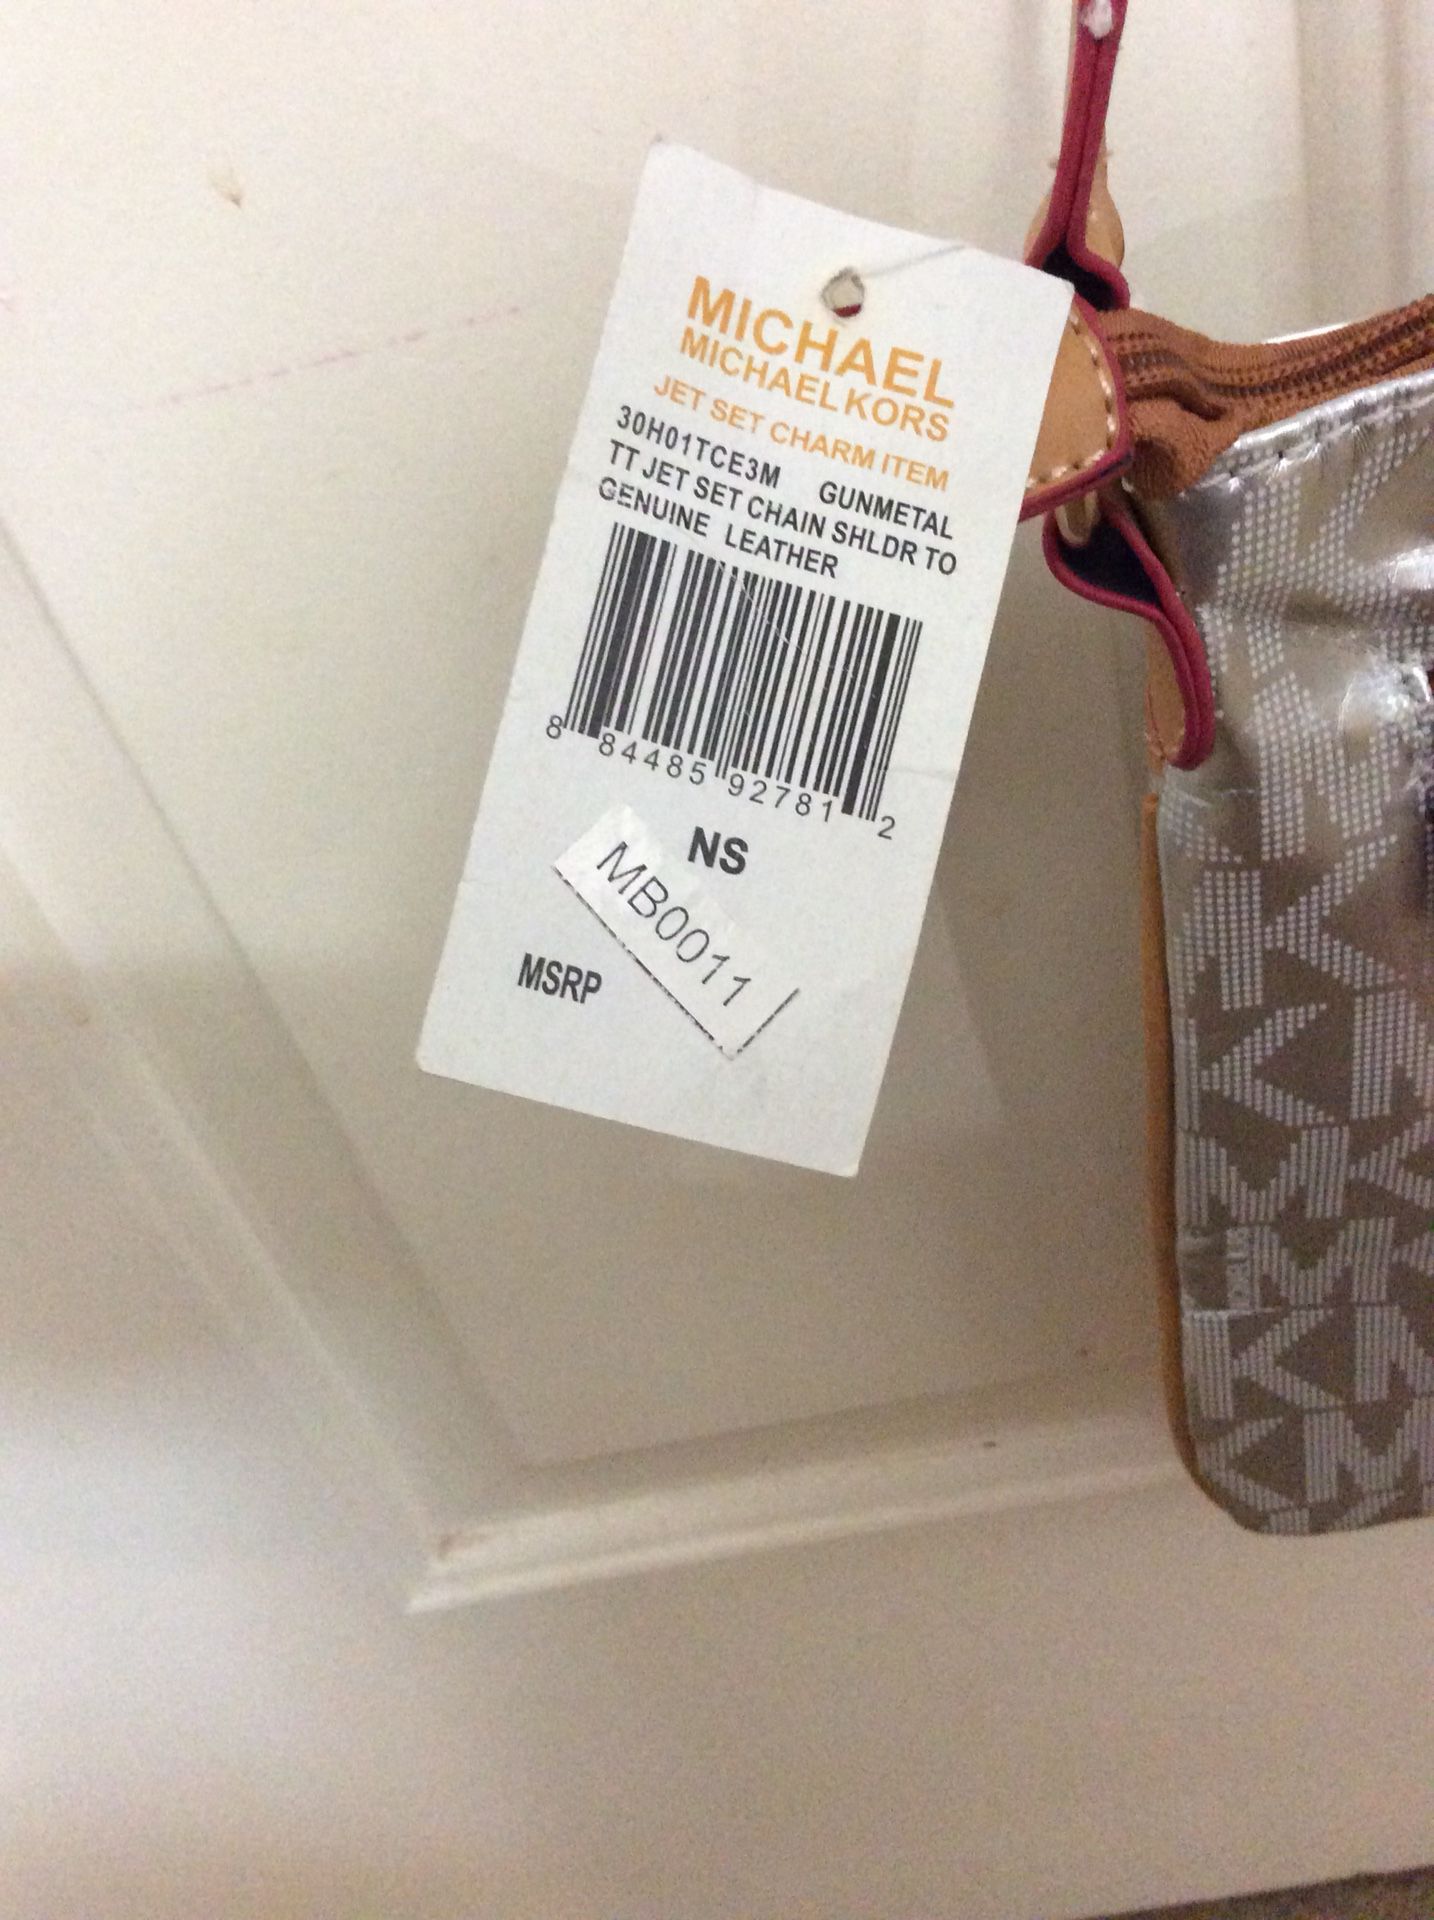 Michael Kors Jetset crossbody purse Brand new with tags for Sale in Spring,  TX - OfferUp